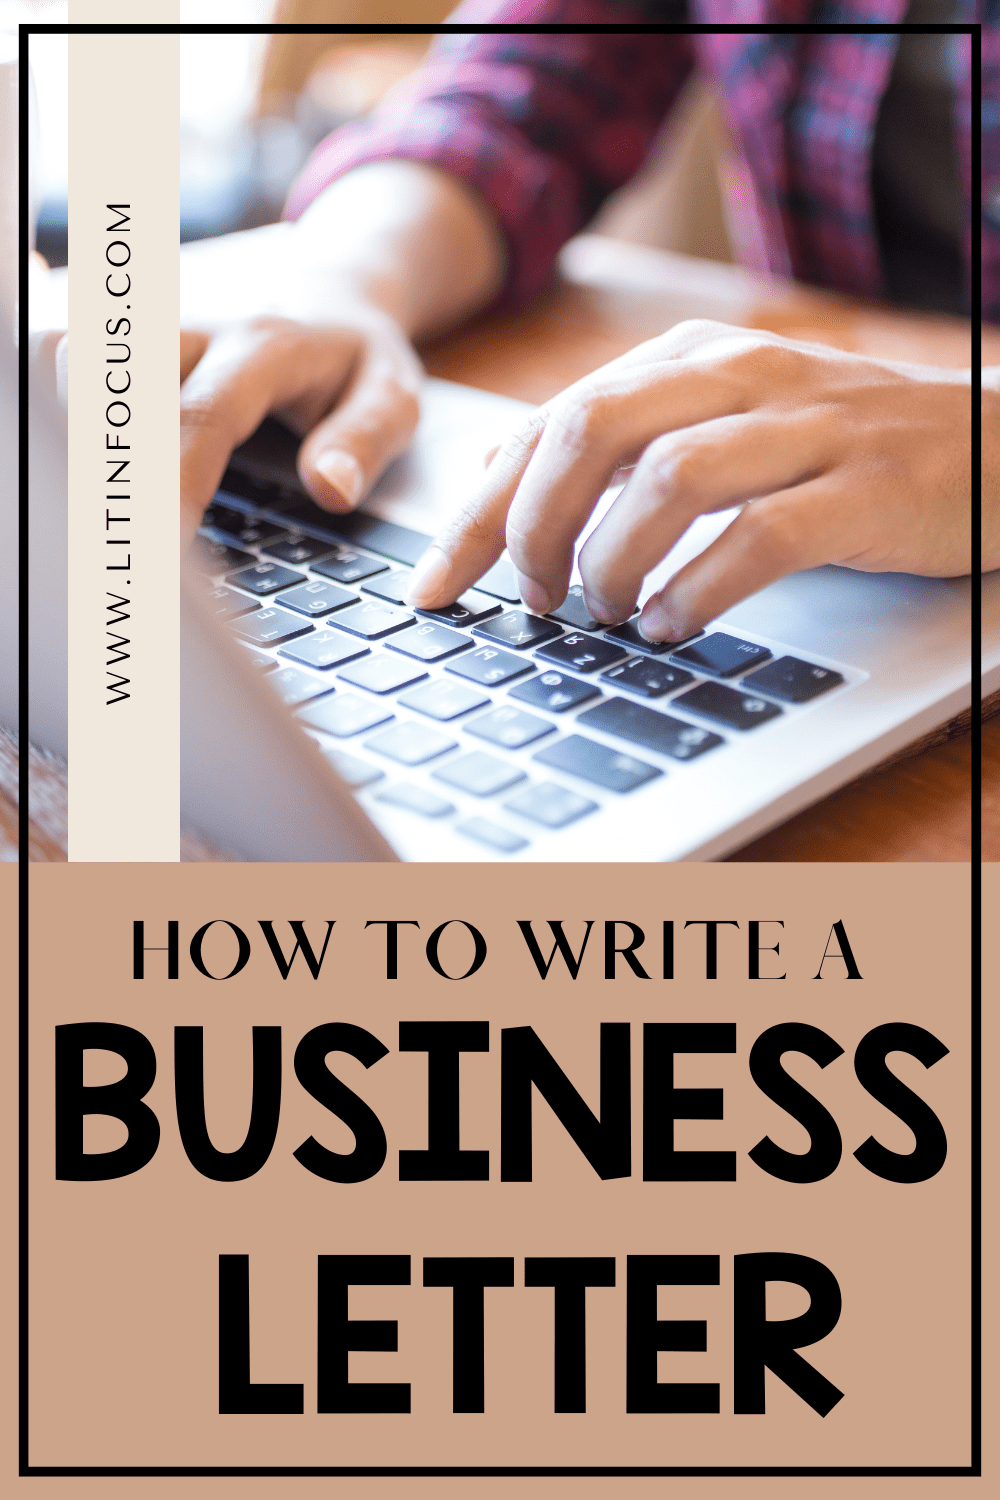 How to Write a Business Letter Lesson Plan for Students